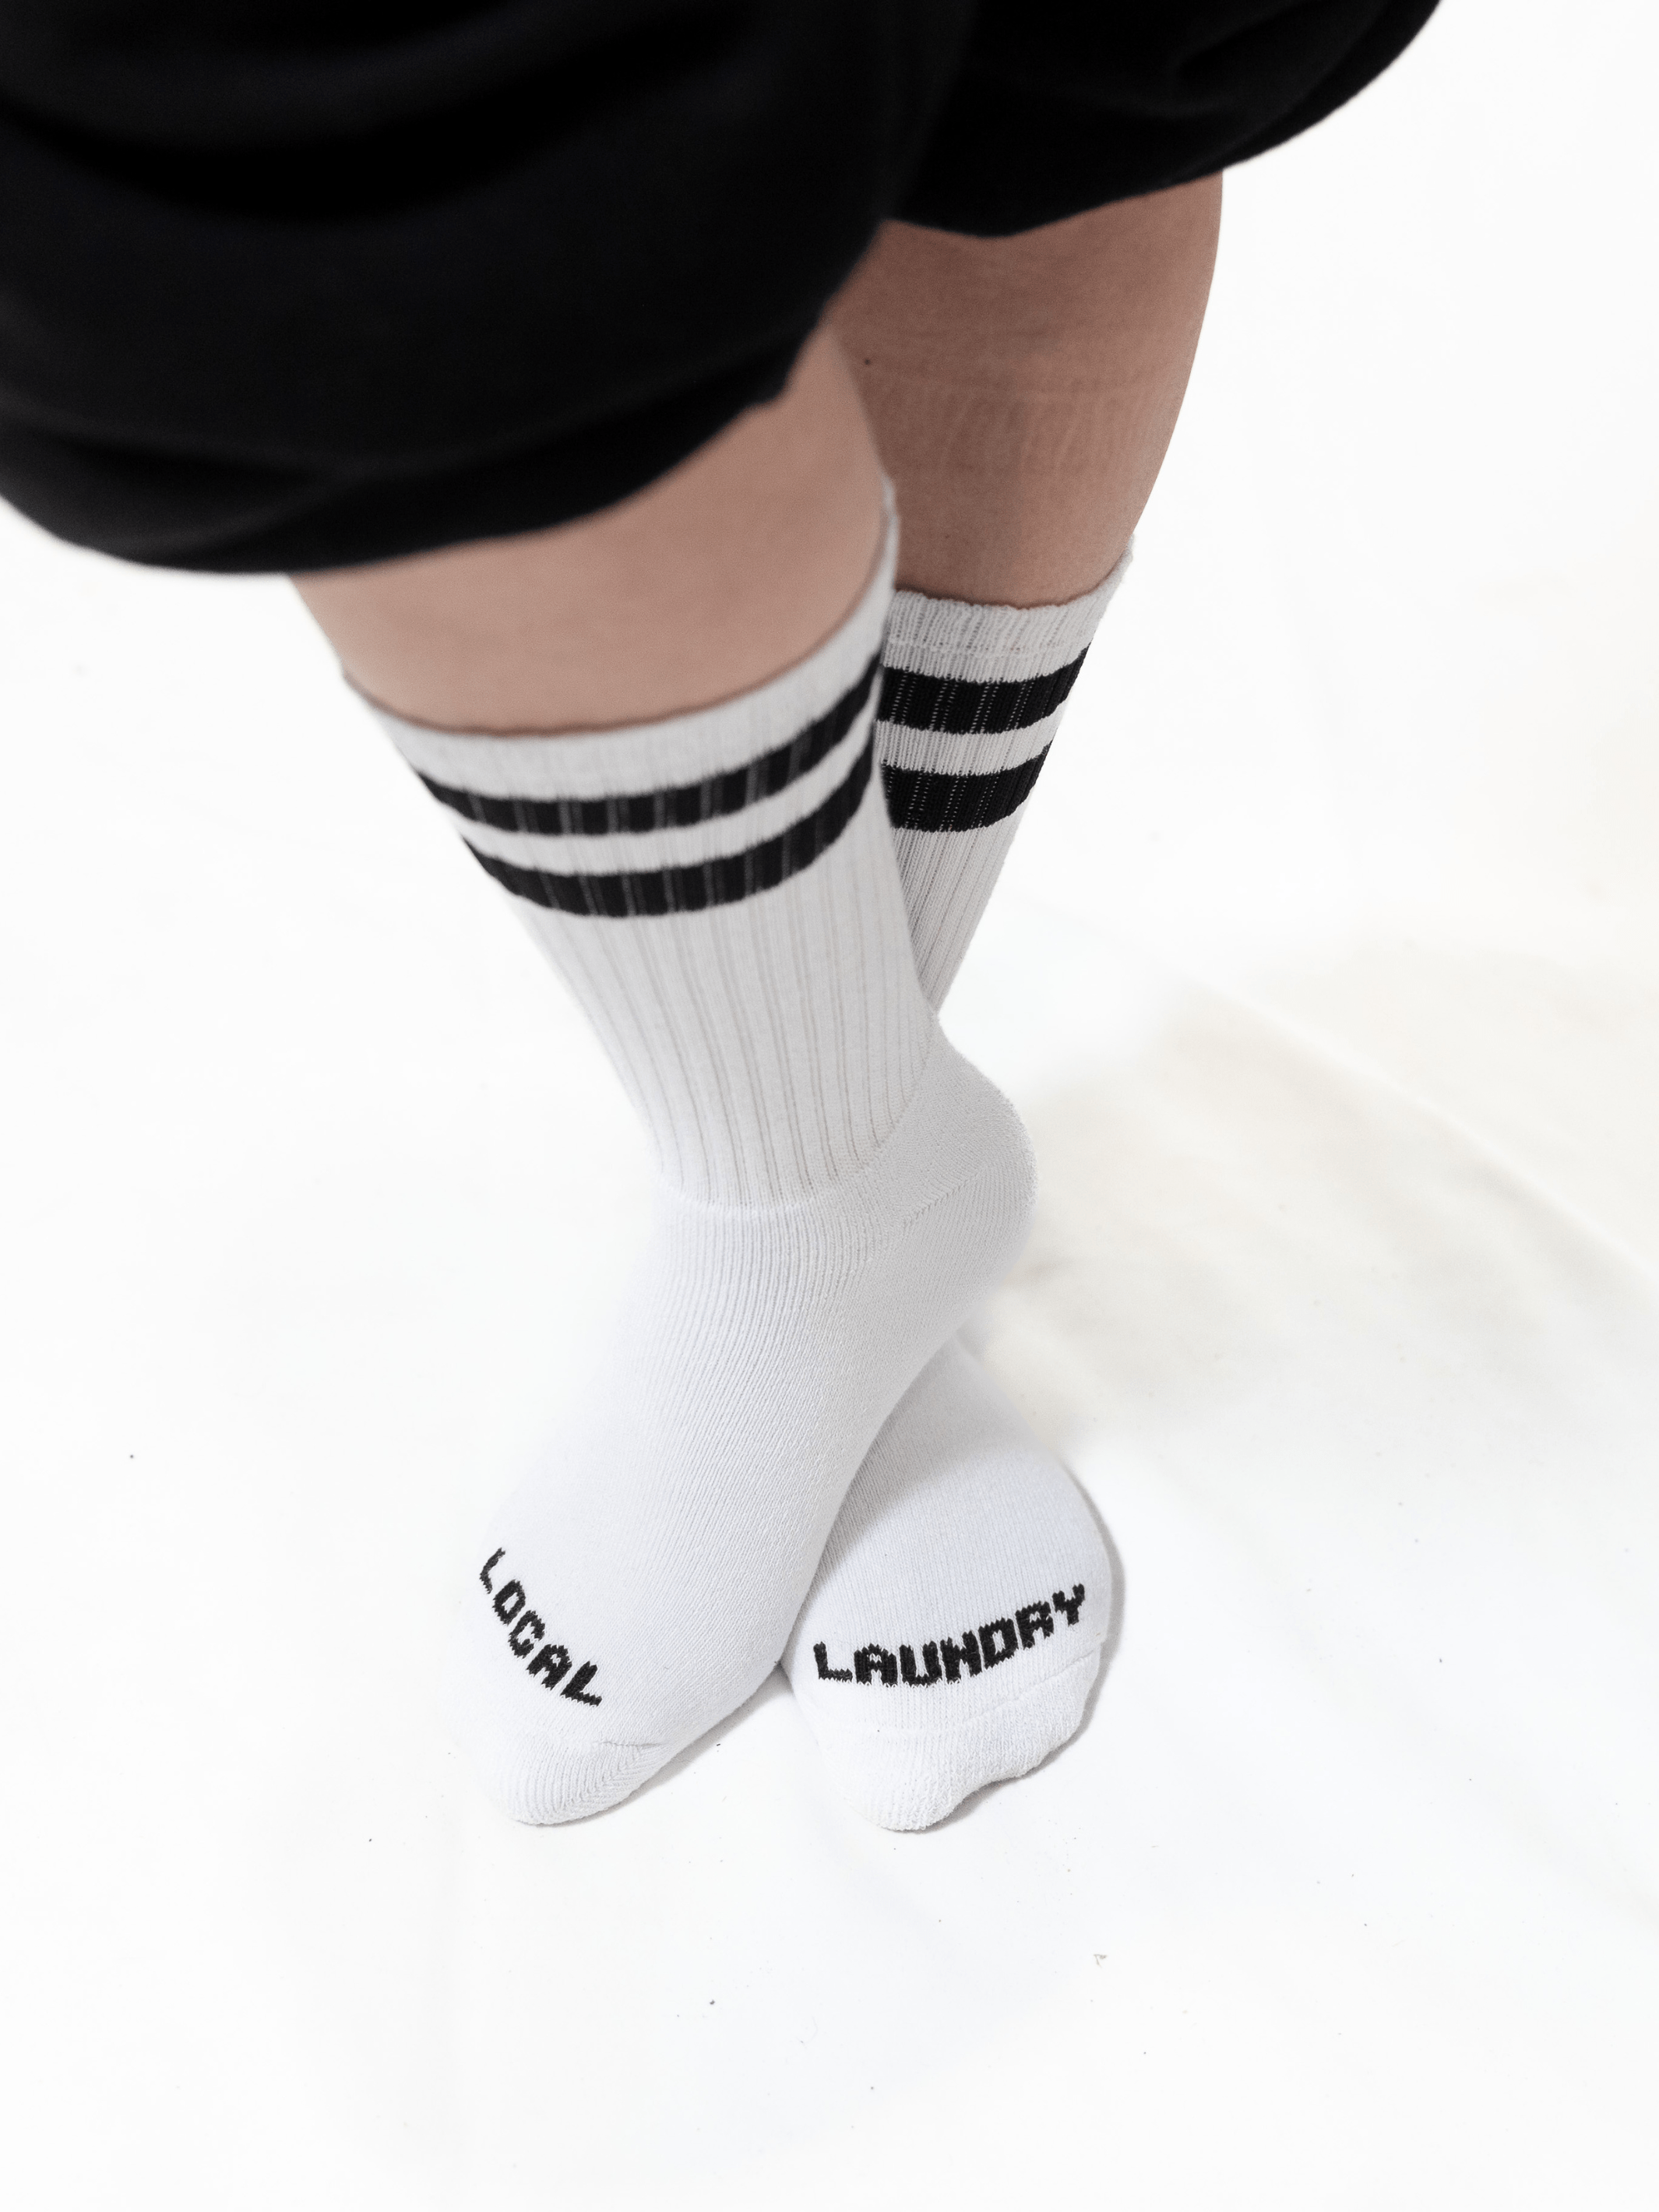 The Local Laundry Giving Sock, white with black contrast stripes and the phrase 